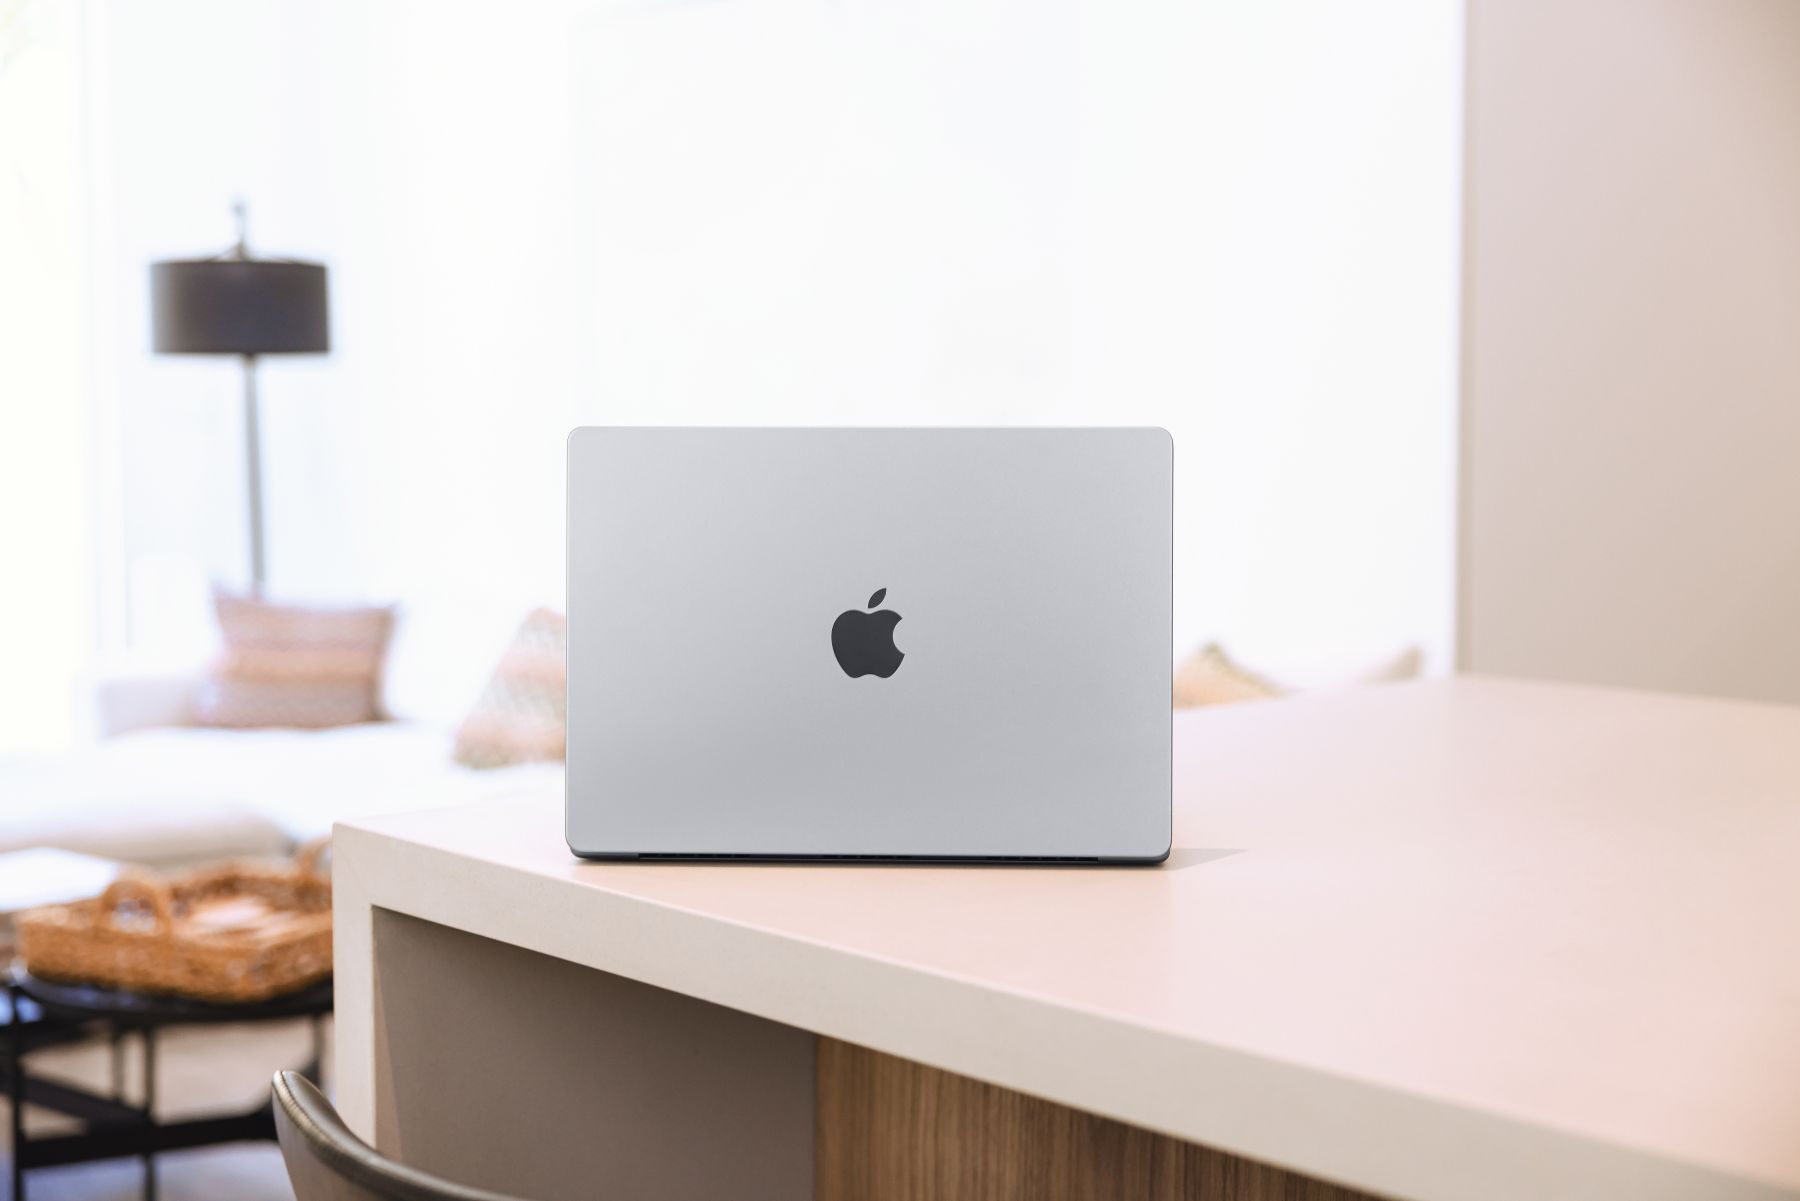 Upgraded Launches MacBook Upgrade Program & Subscription Payment Service in the U.S.